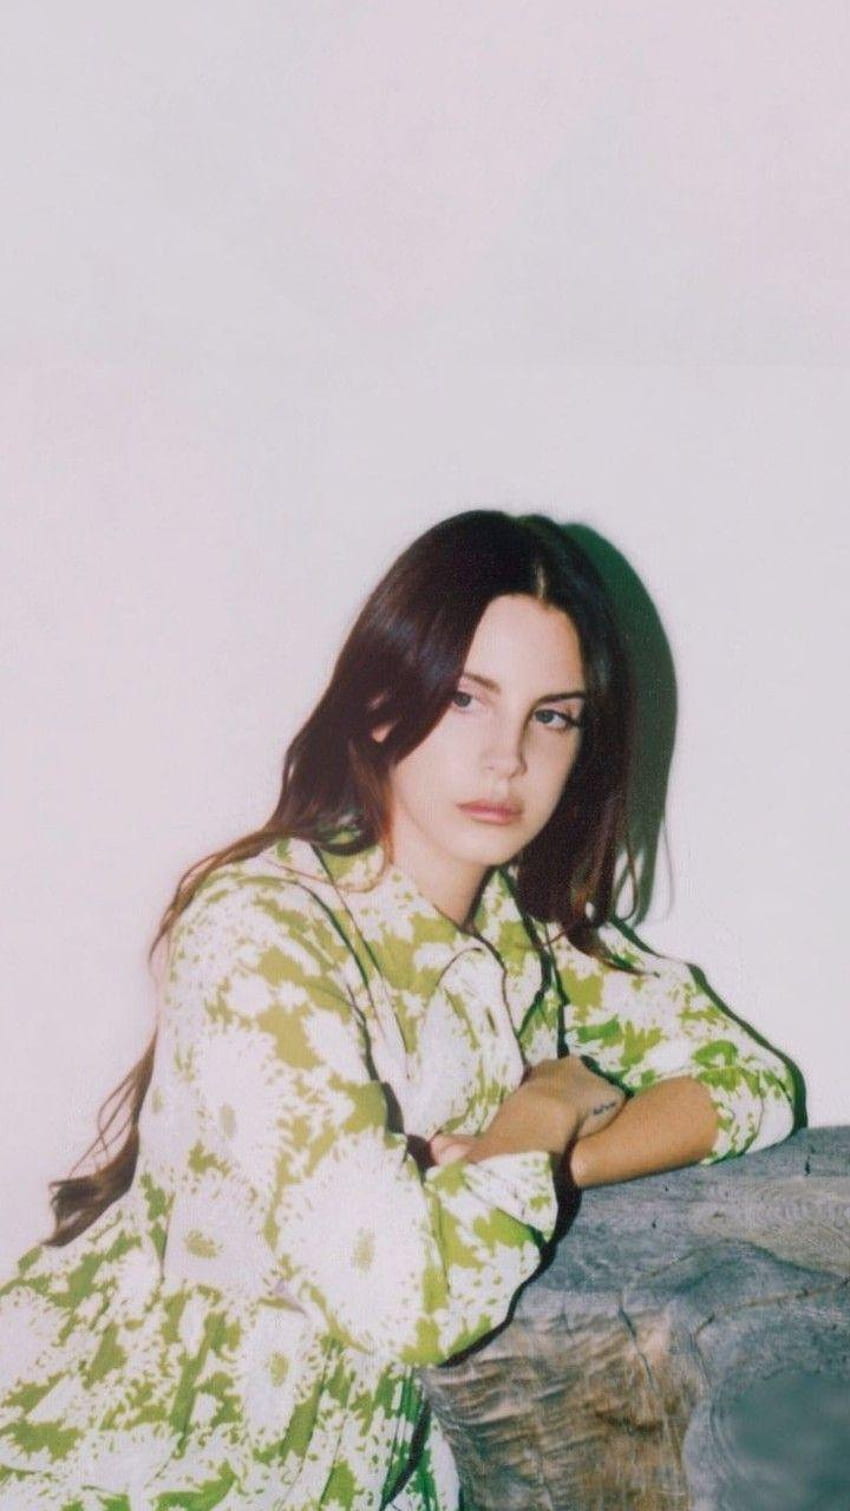 A woman in green dress posing for the camera - Lana Del Rey